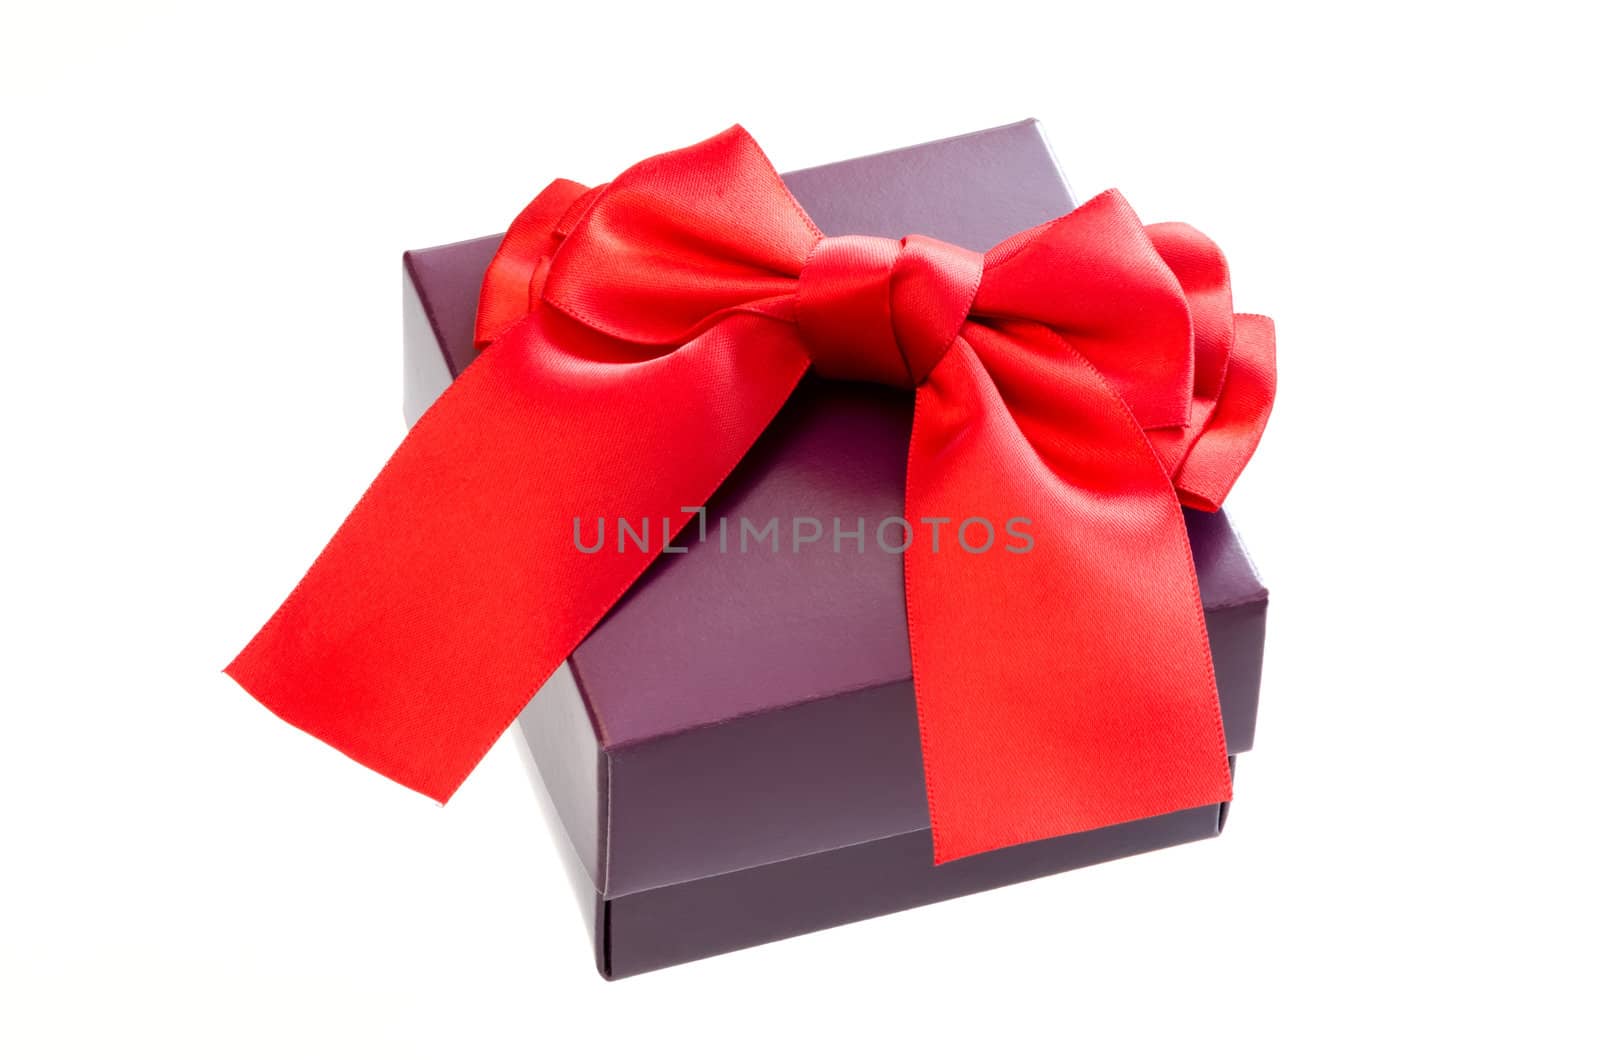 Gift box with a red ribbon bow isolated on white background.